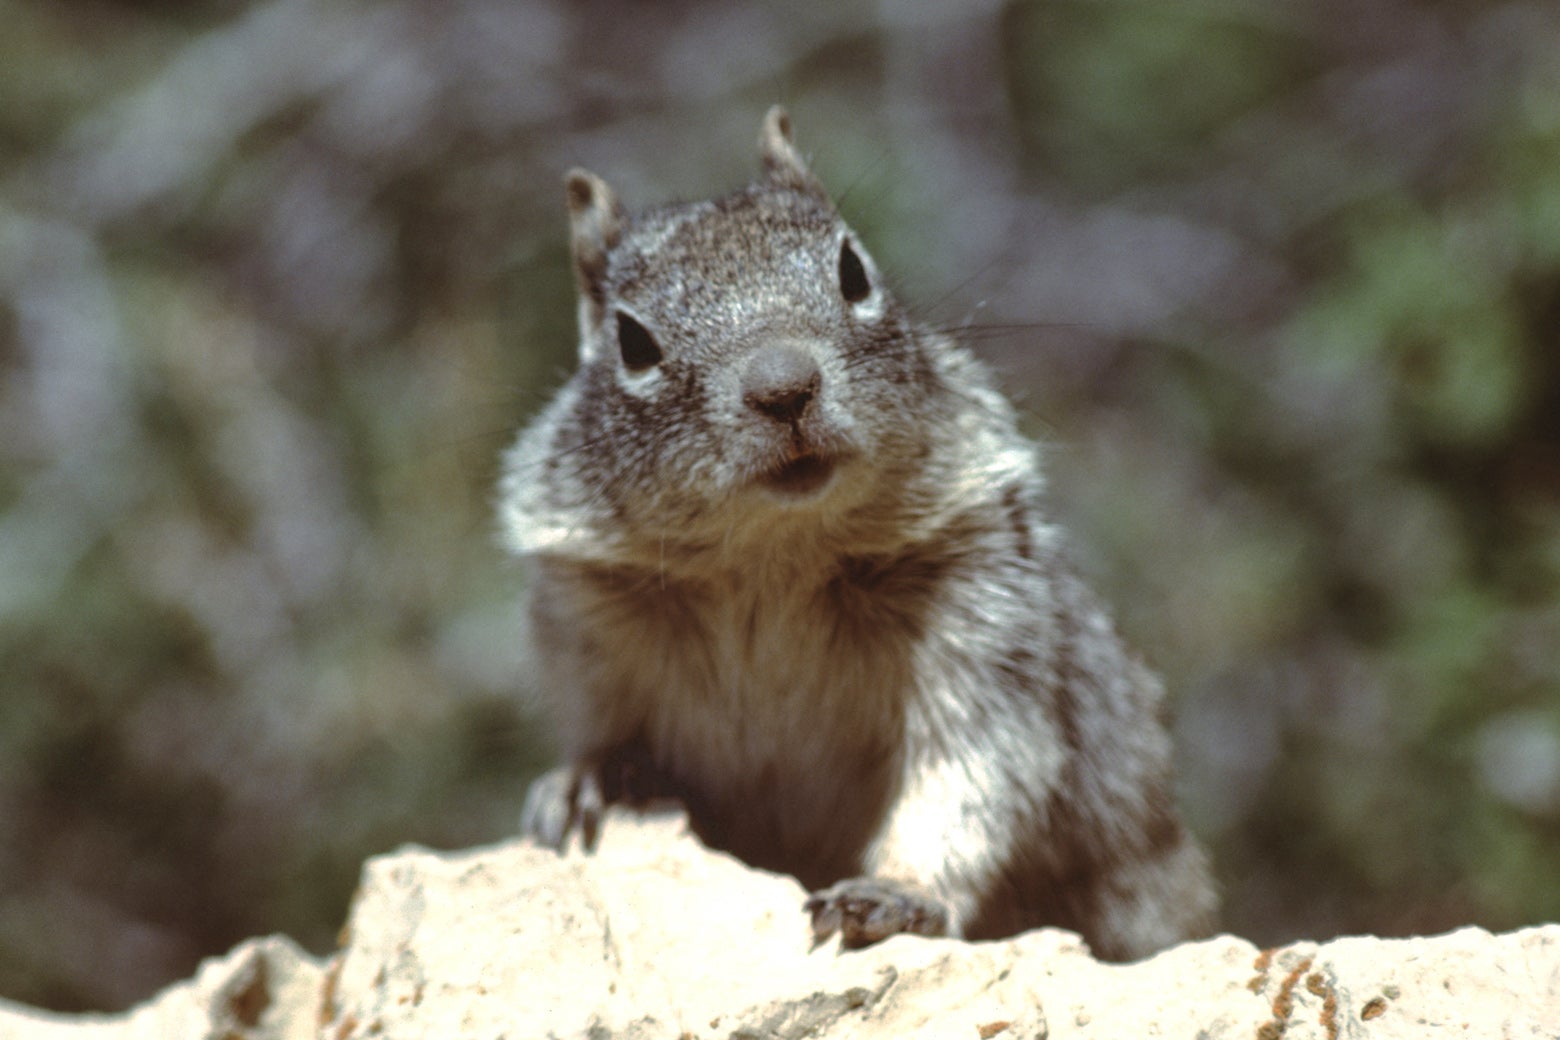 Do national parks have a squirrel problem?